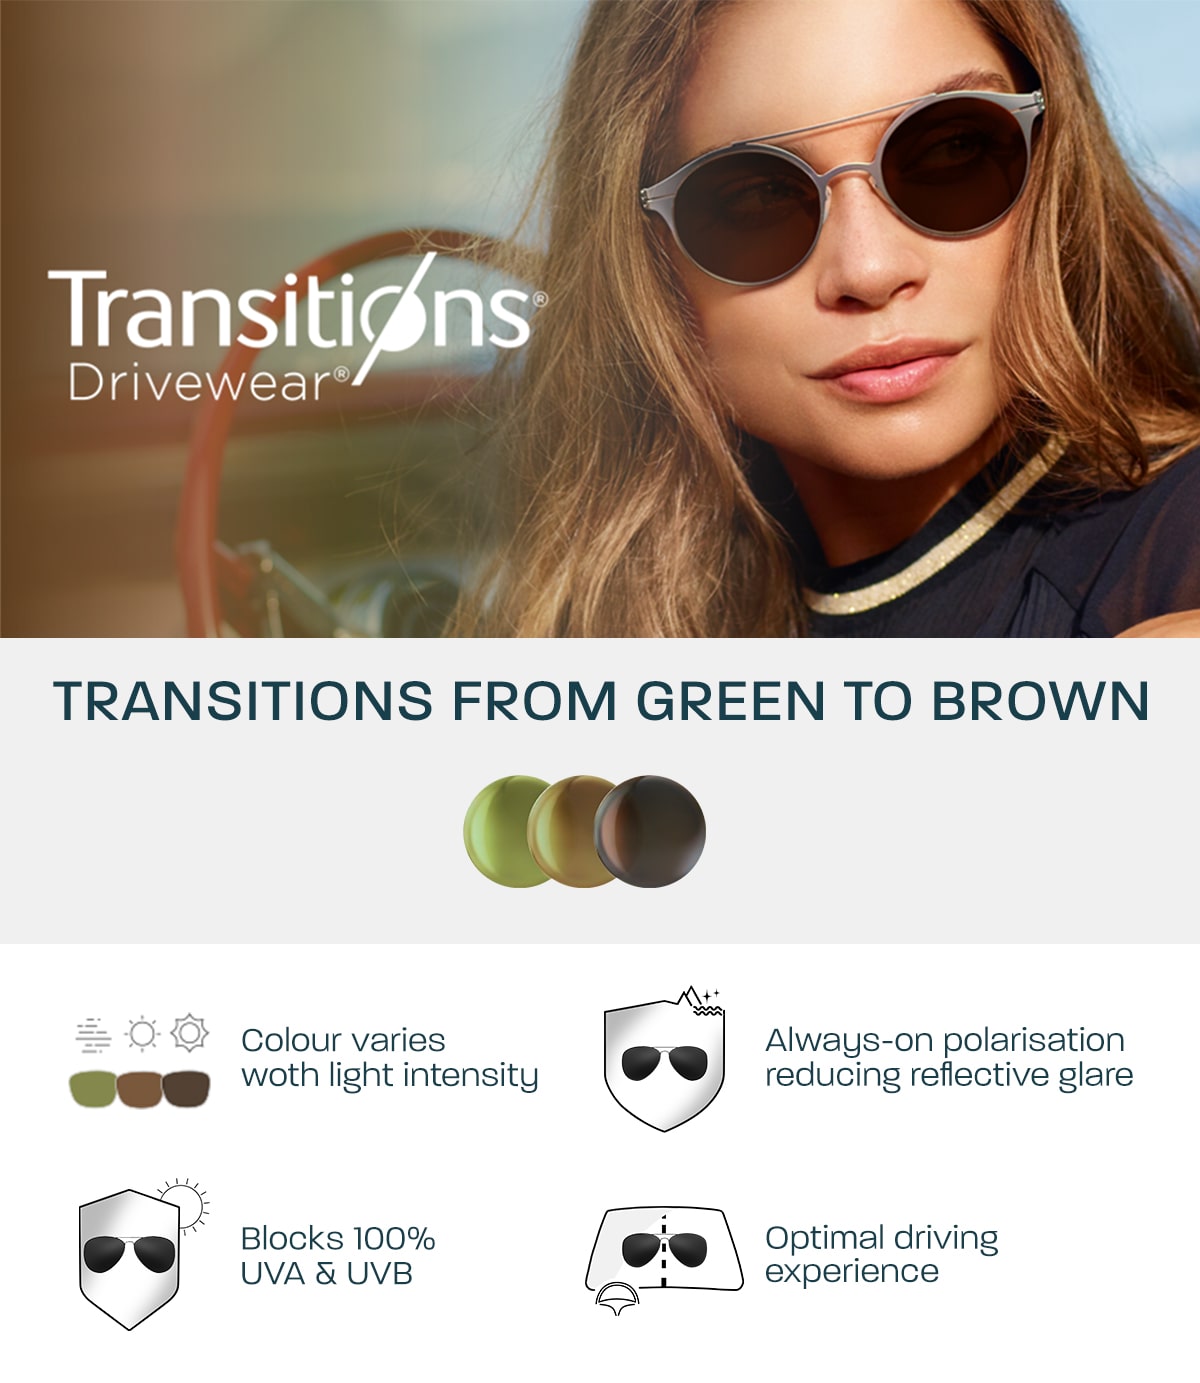 Transitions® Drivewear®: Transitions from green to brown. Colour varies with light intensity. Always-on polarisation reducing reflective glare. Blocks 100% UVA & UVB. Optimal driving experience.